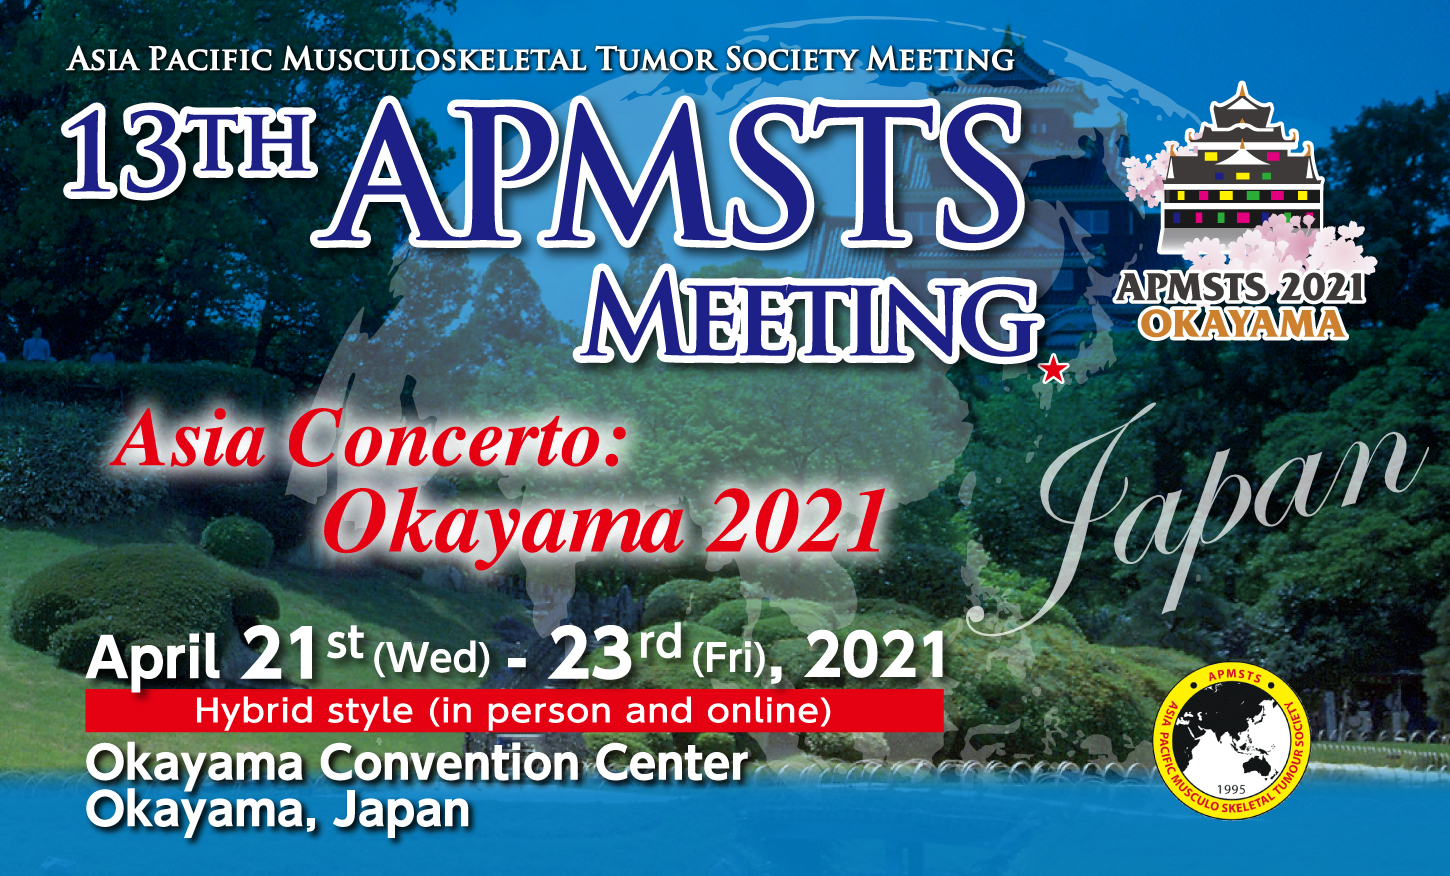 The 13th Asia Pacific Musculoskeletal Tumor Society Meeting